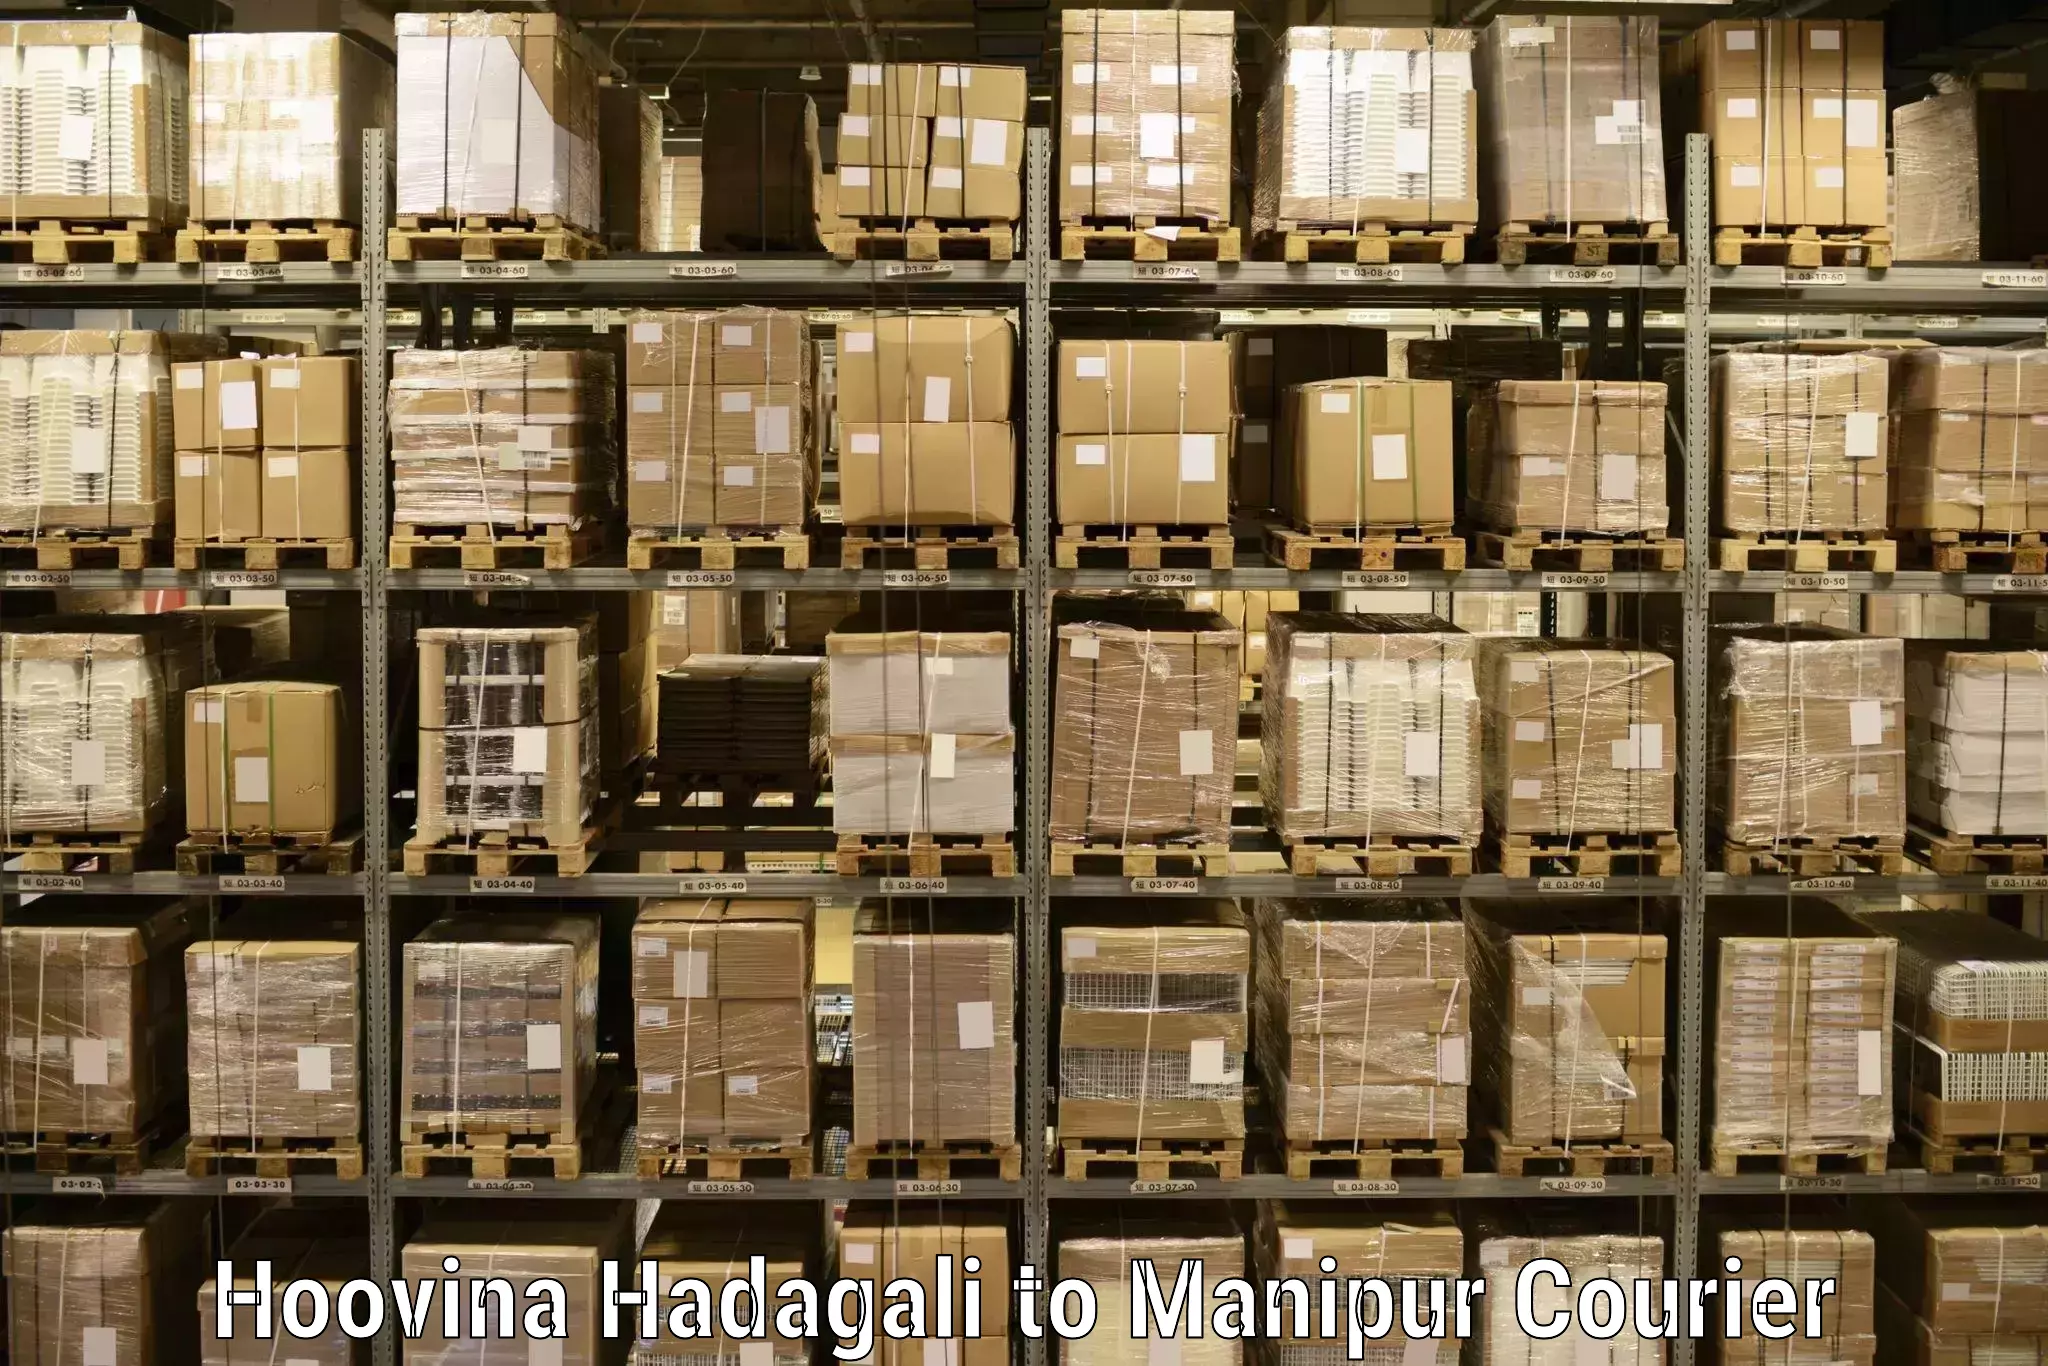 State-of-the-art courier technology Hoovina Hadagali to Kanti